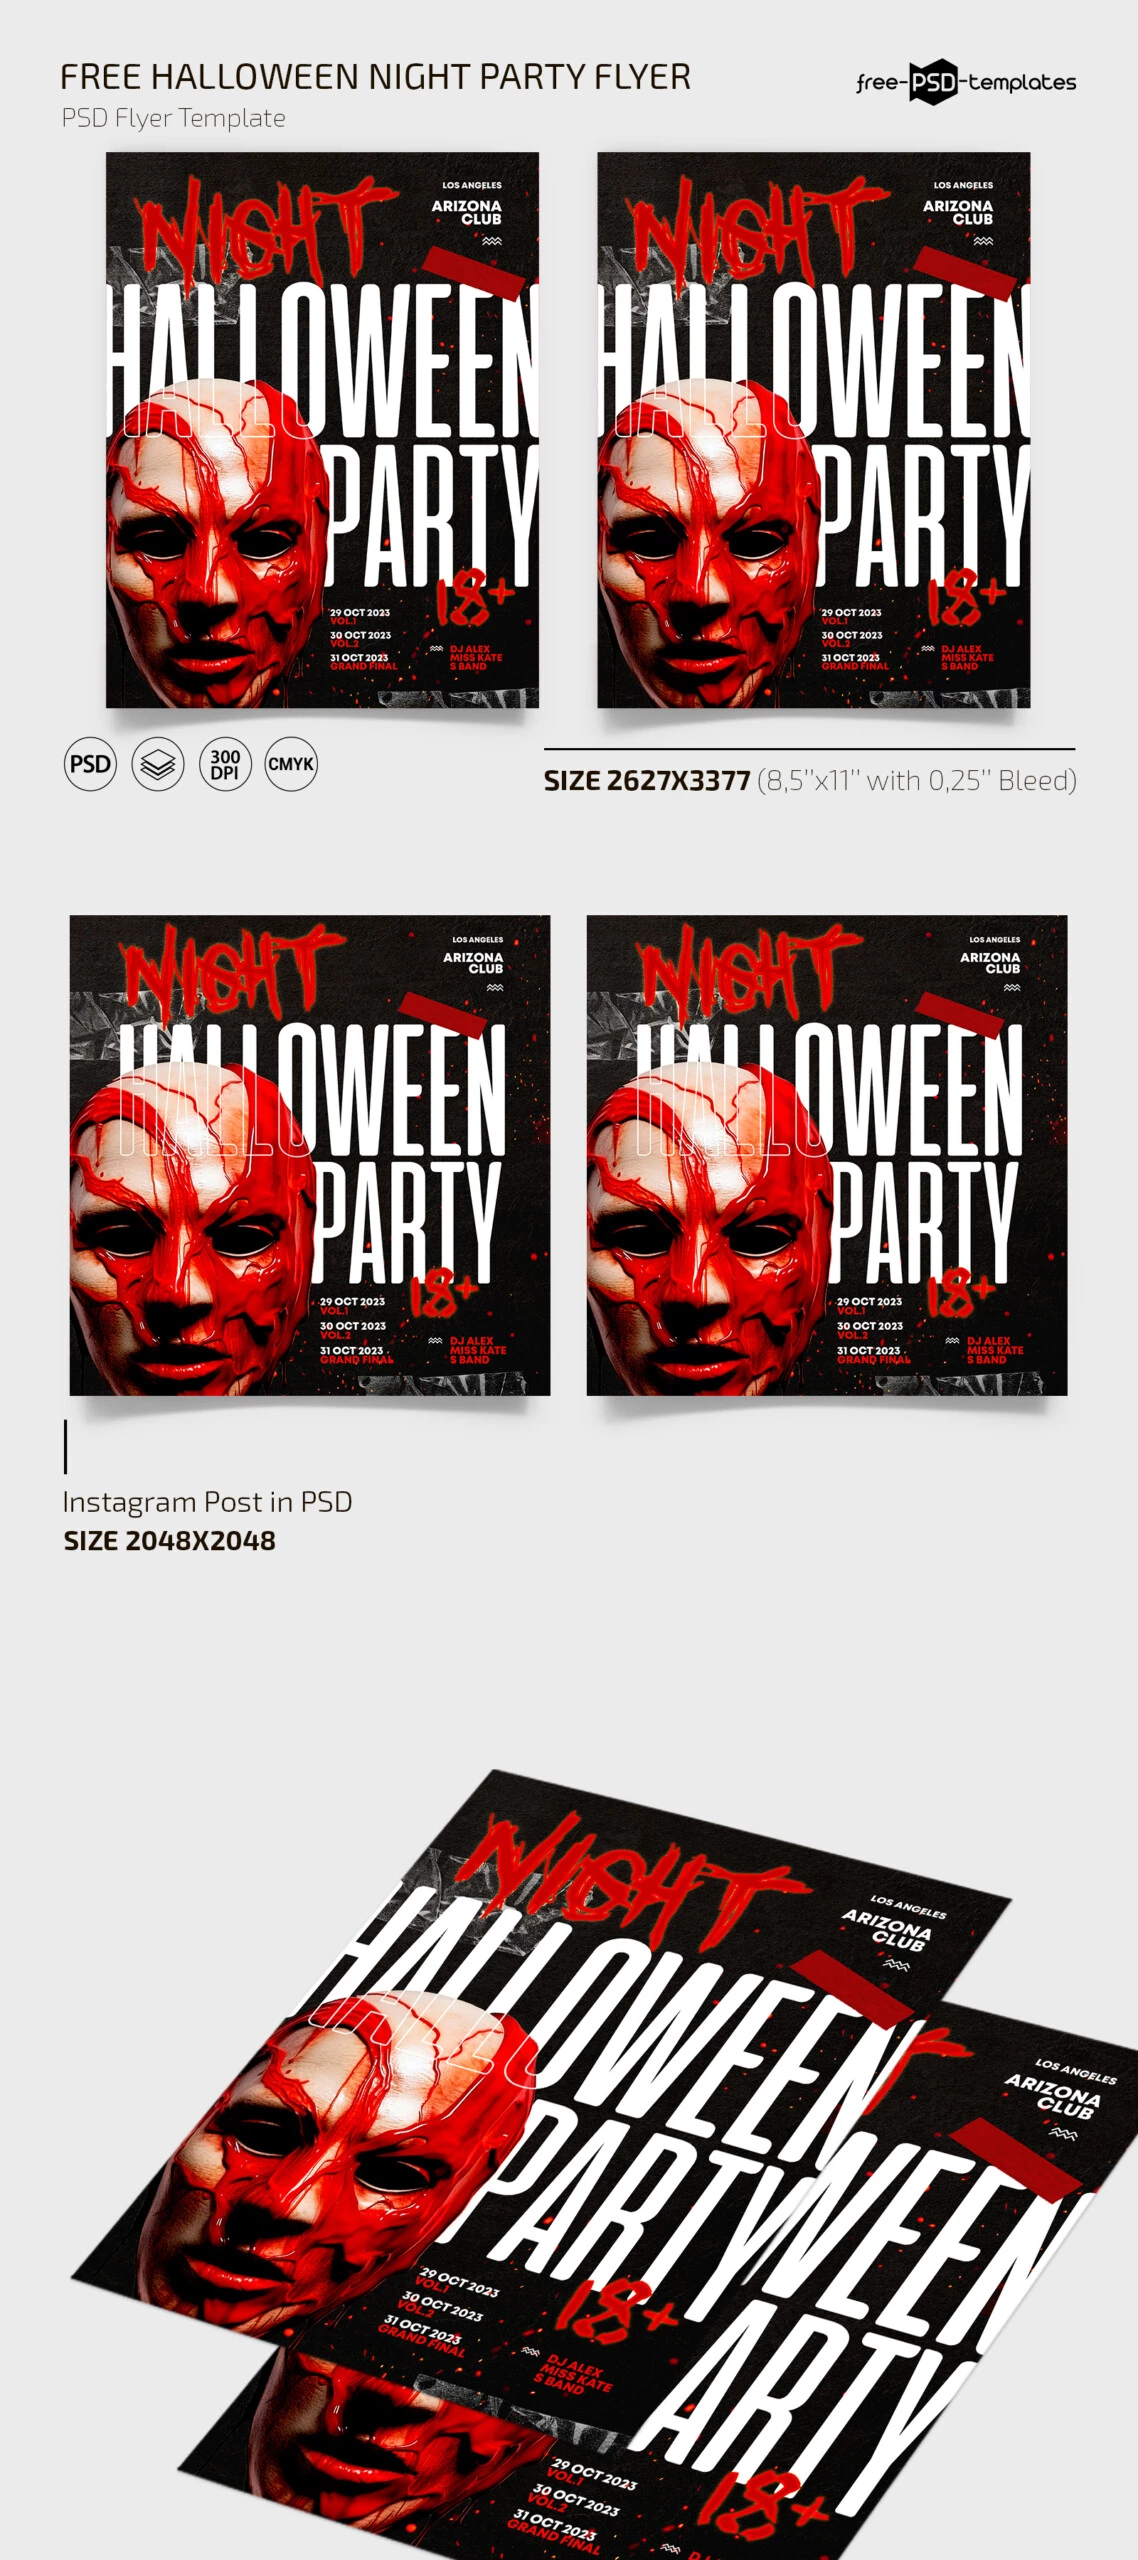 Free Halloween Night Party Flyer Template + Instagram Post (PSD)